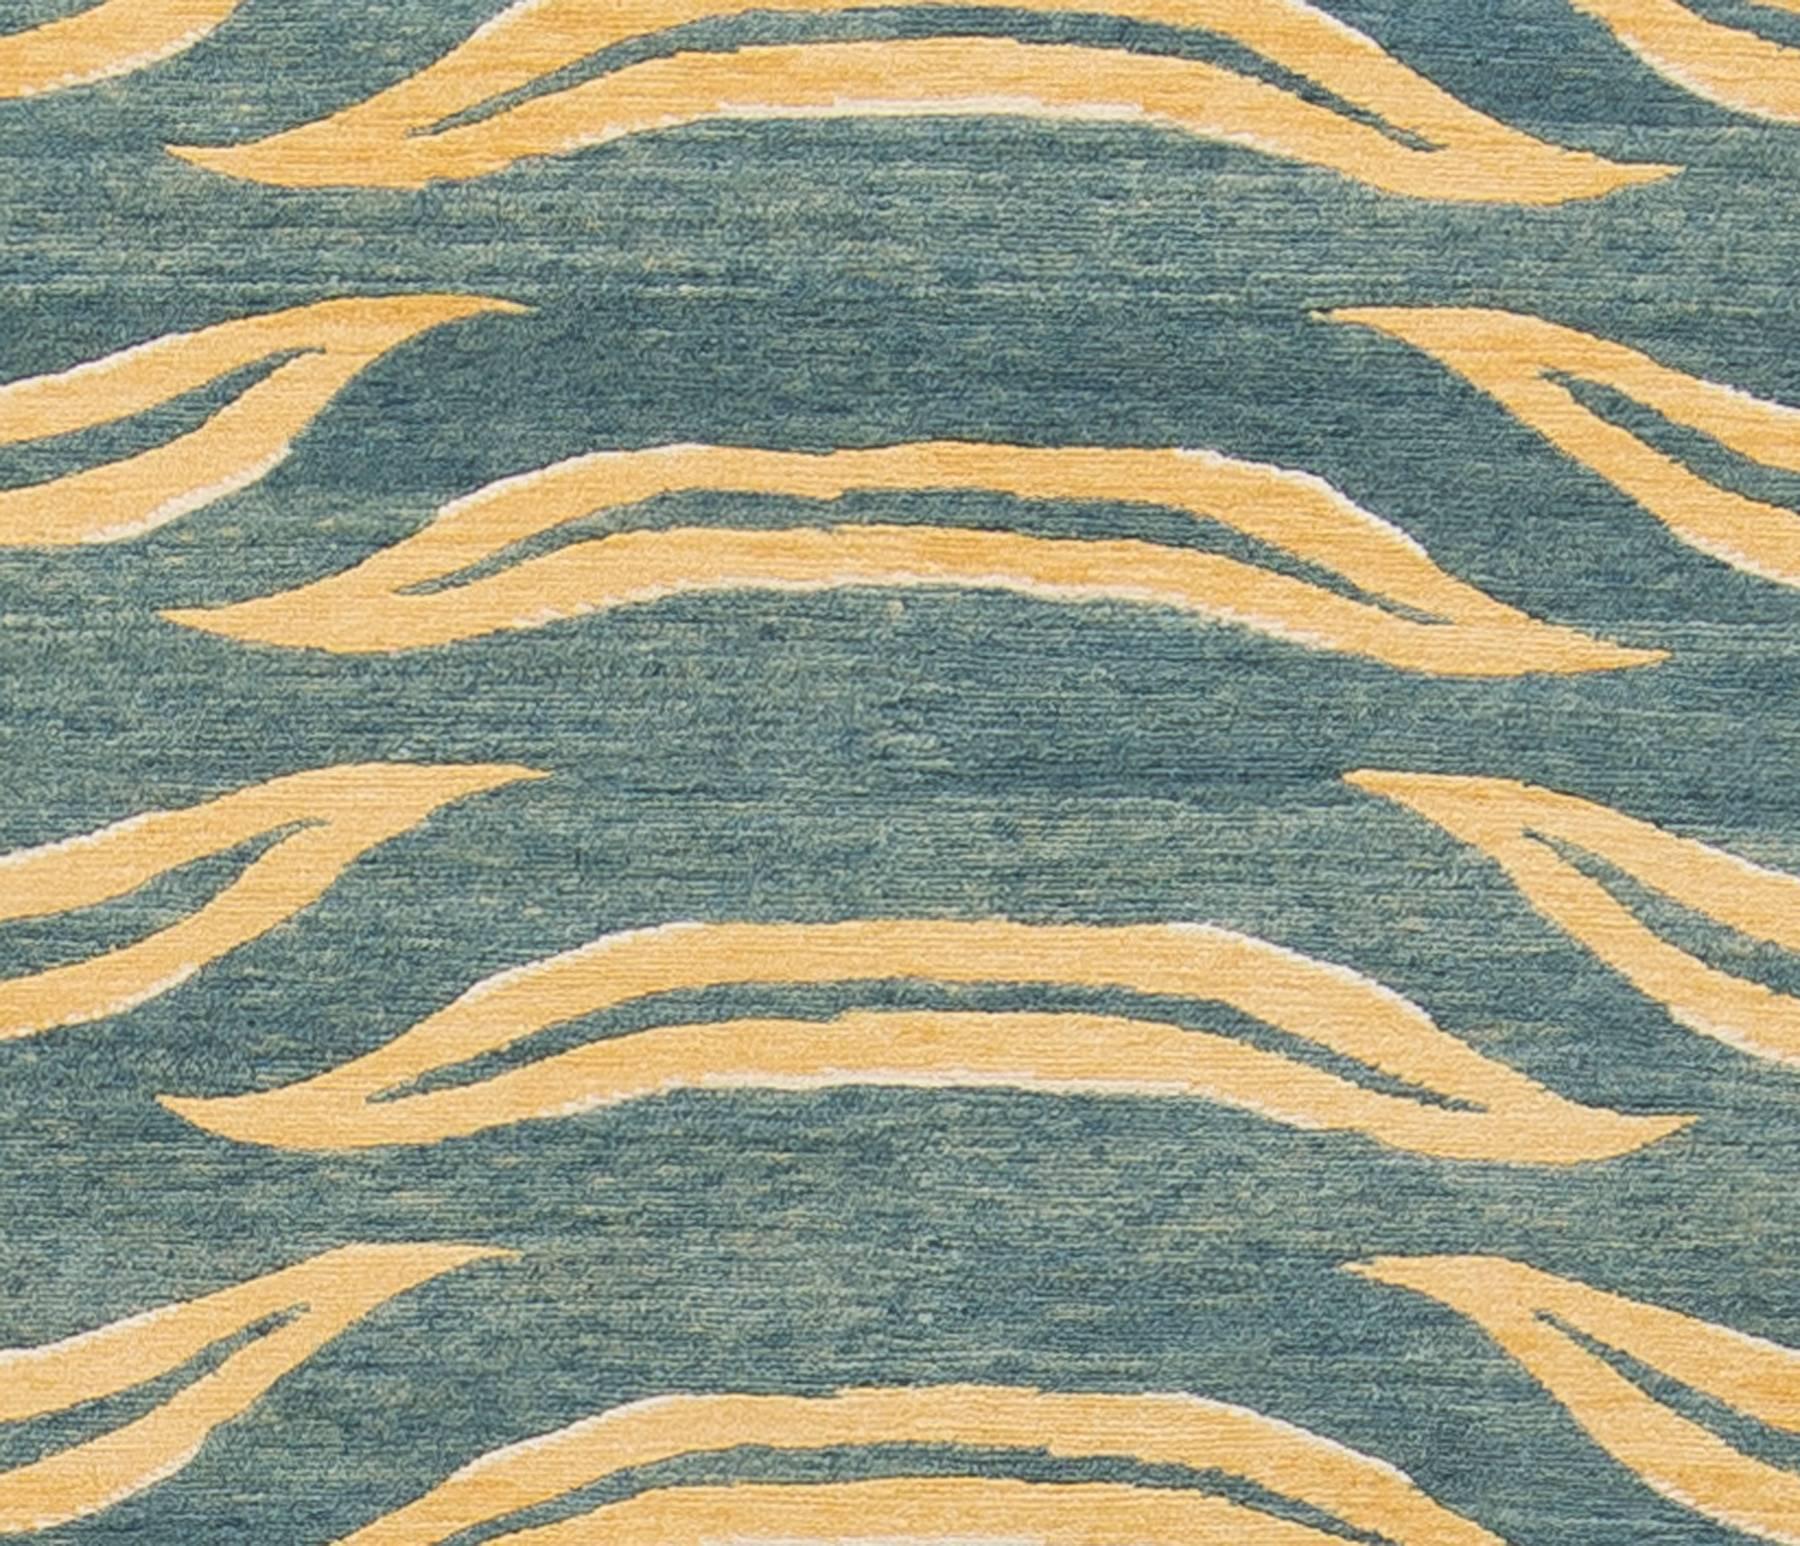 Hand-knotted rug in Himalayan vegetal dyed wool, GoodWeave certified.